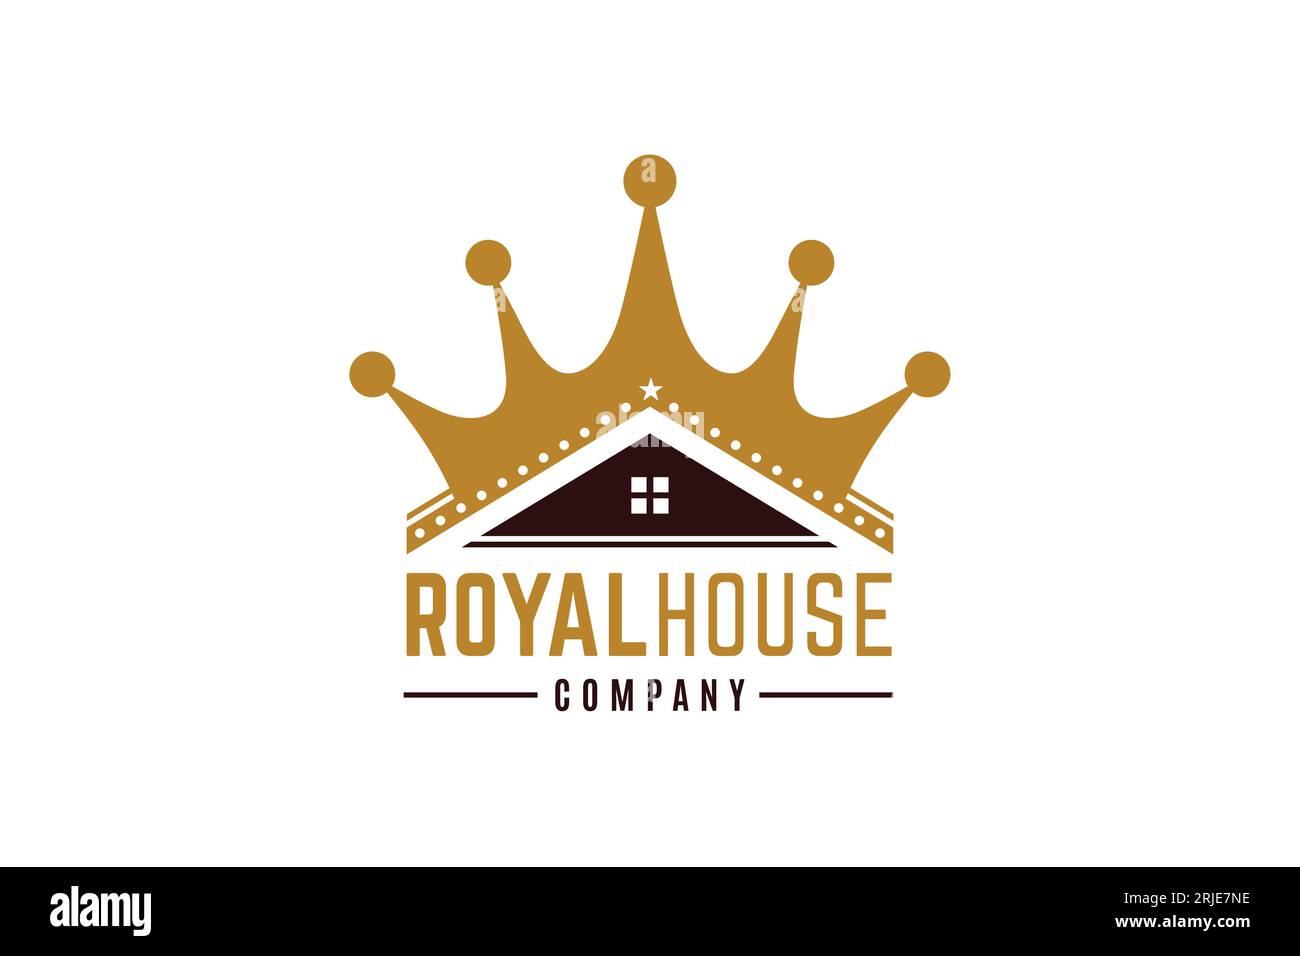 House Symbol With Golden Crown, King Queen Crown Home For Real Estate, Property, Rent House, Hotel, Apartment Logo Vector Design Stock Vector